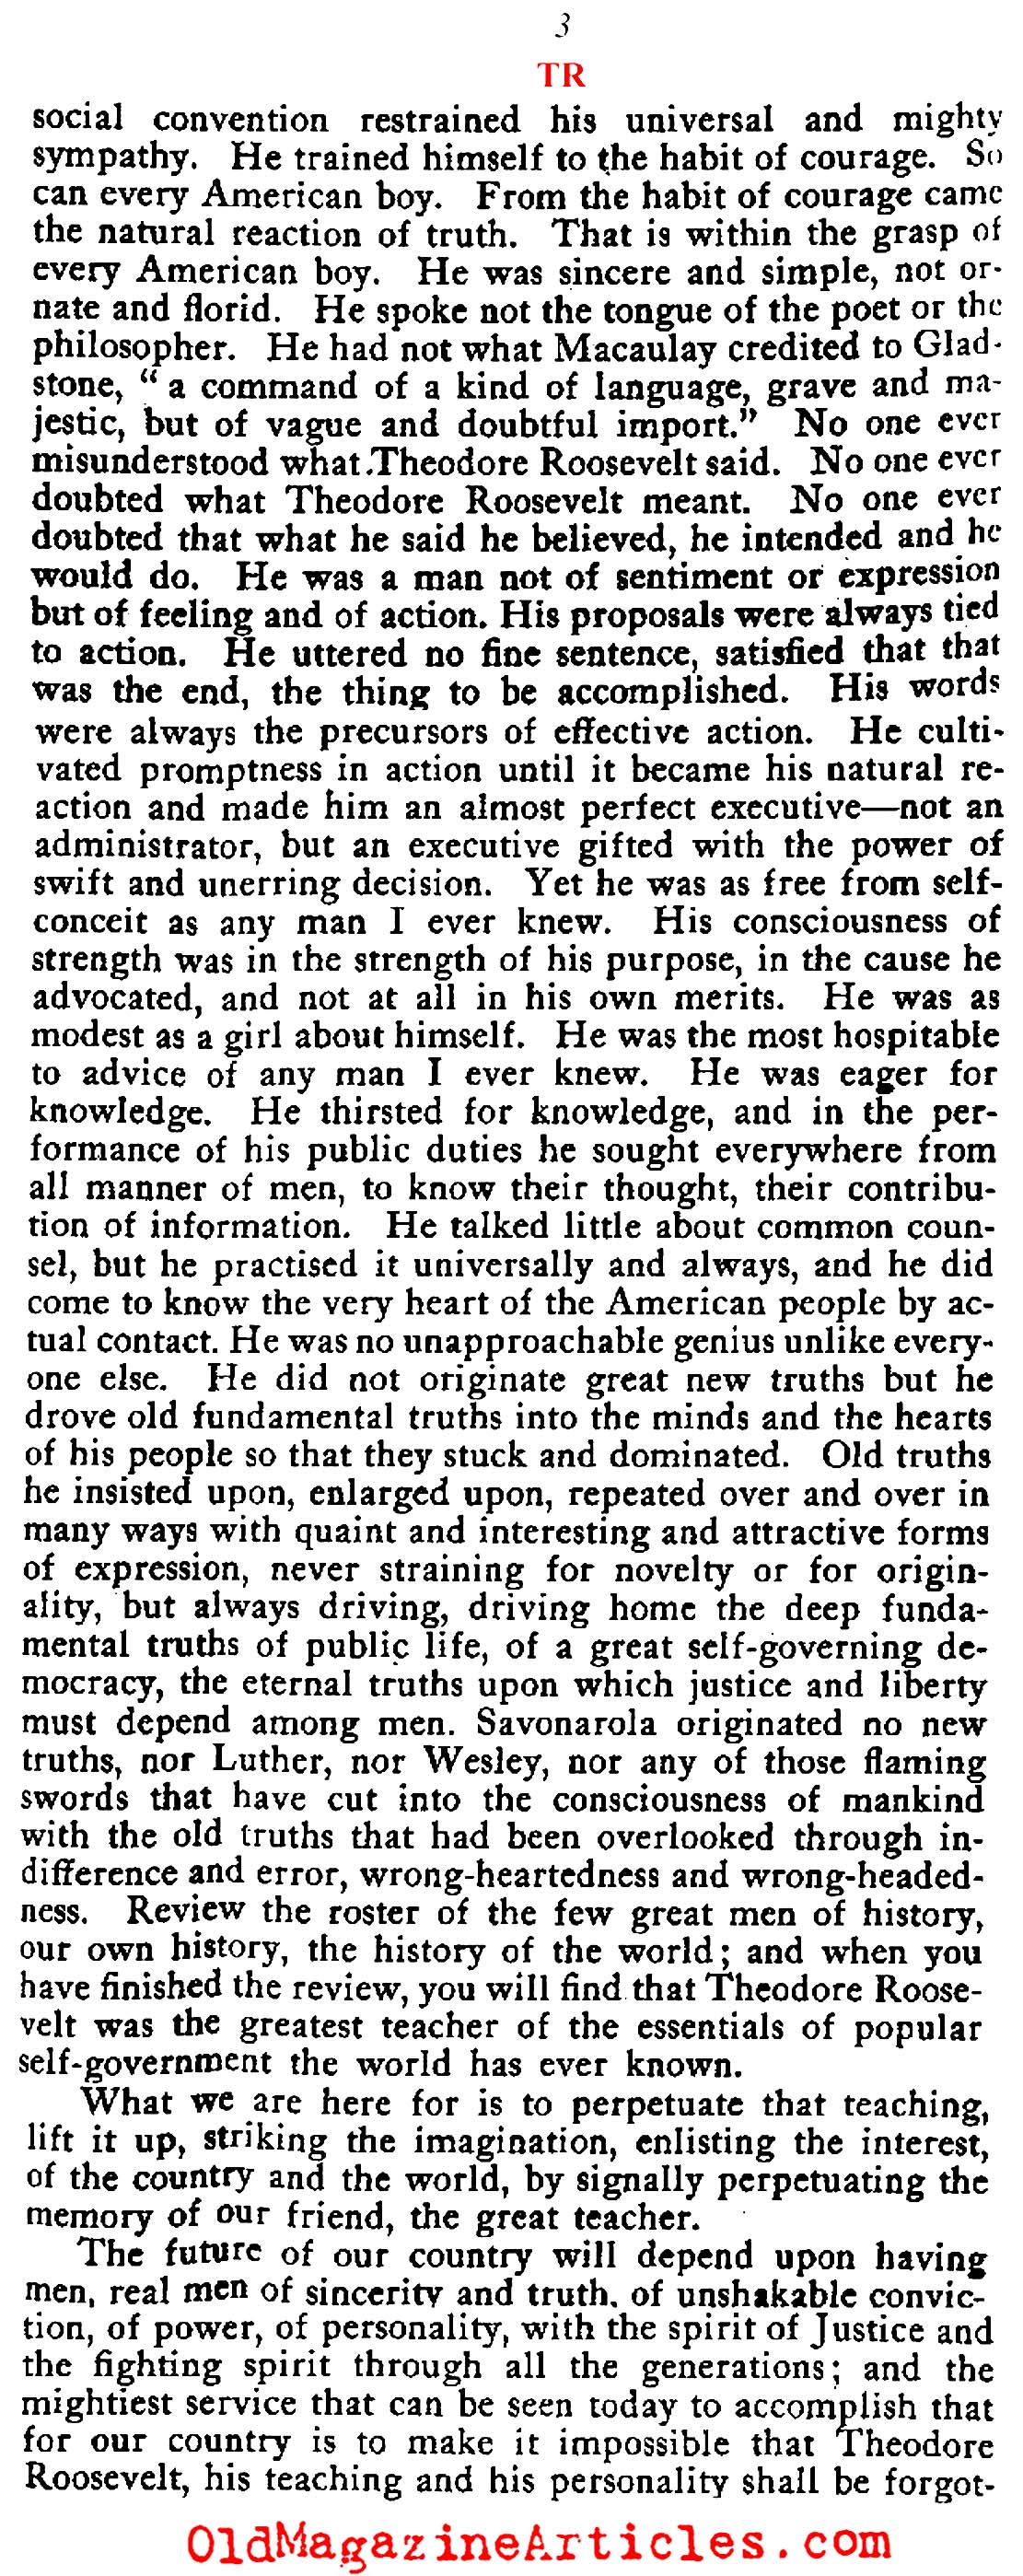 Elihu Root on Teddy Roosevelt (The North American Review, 1919)